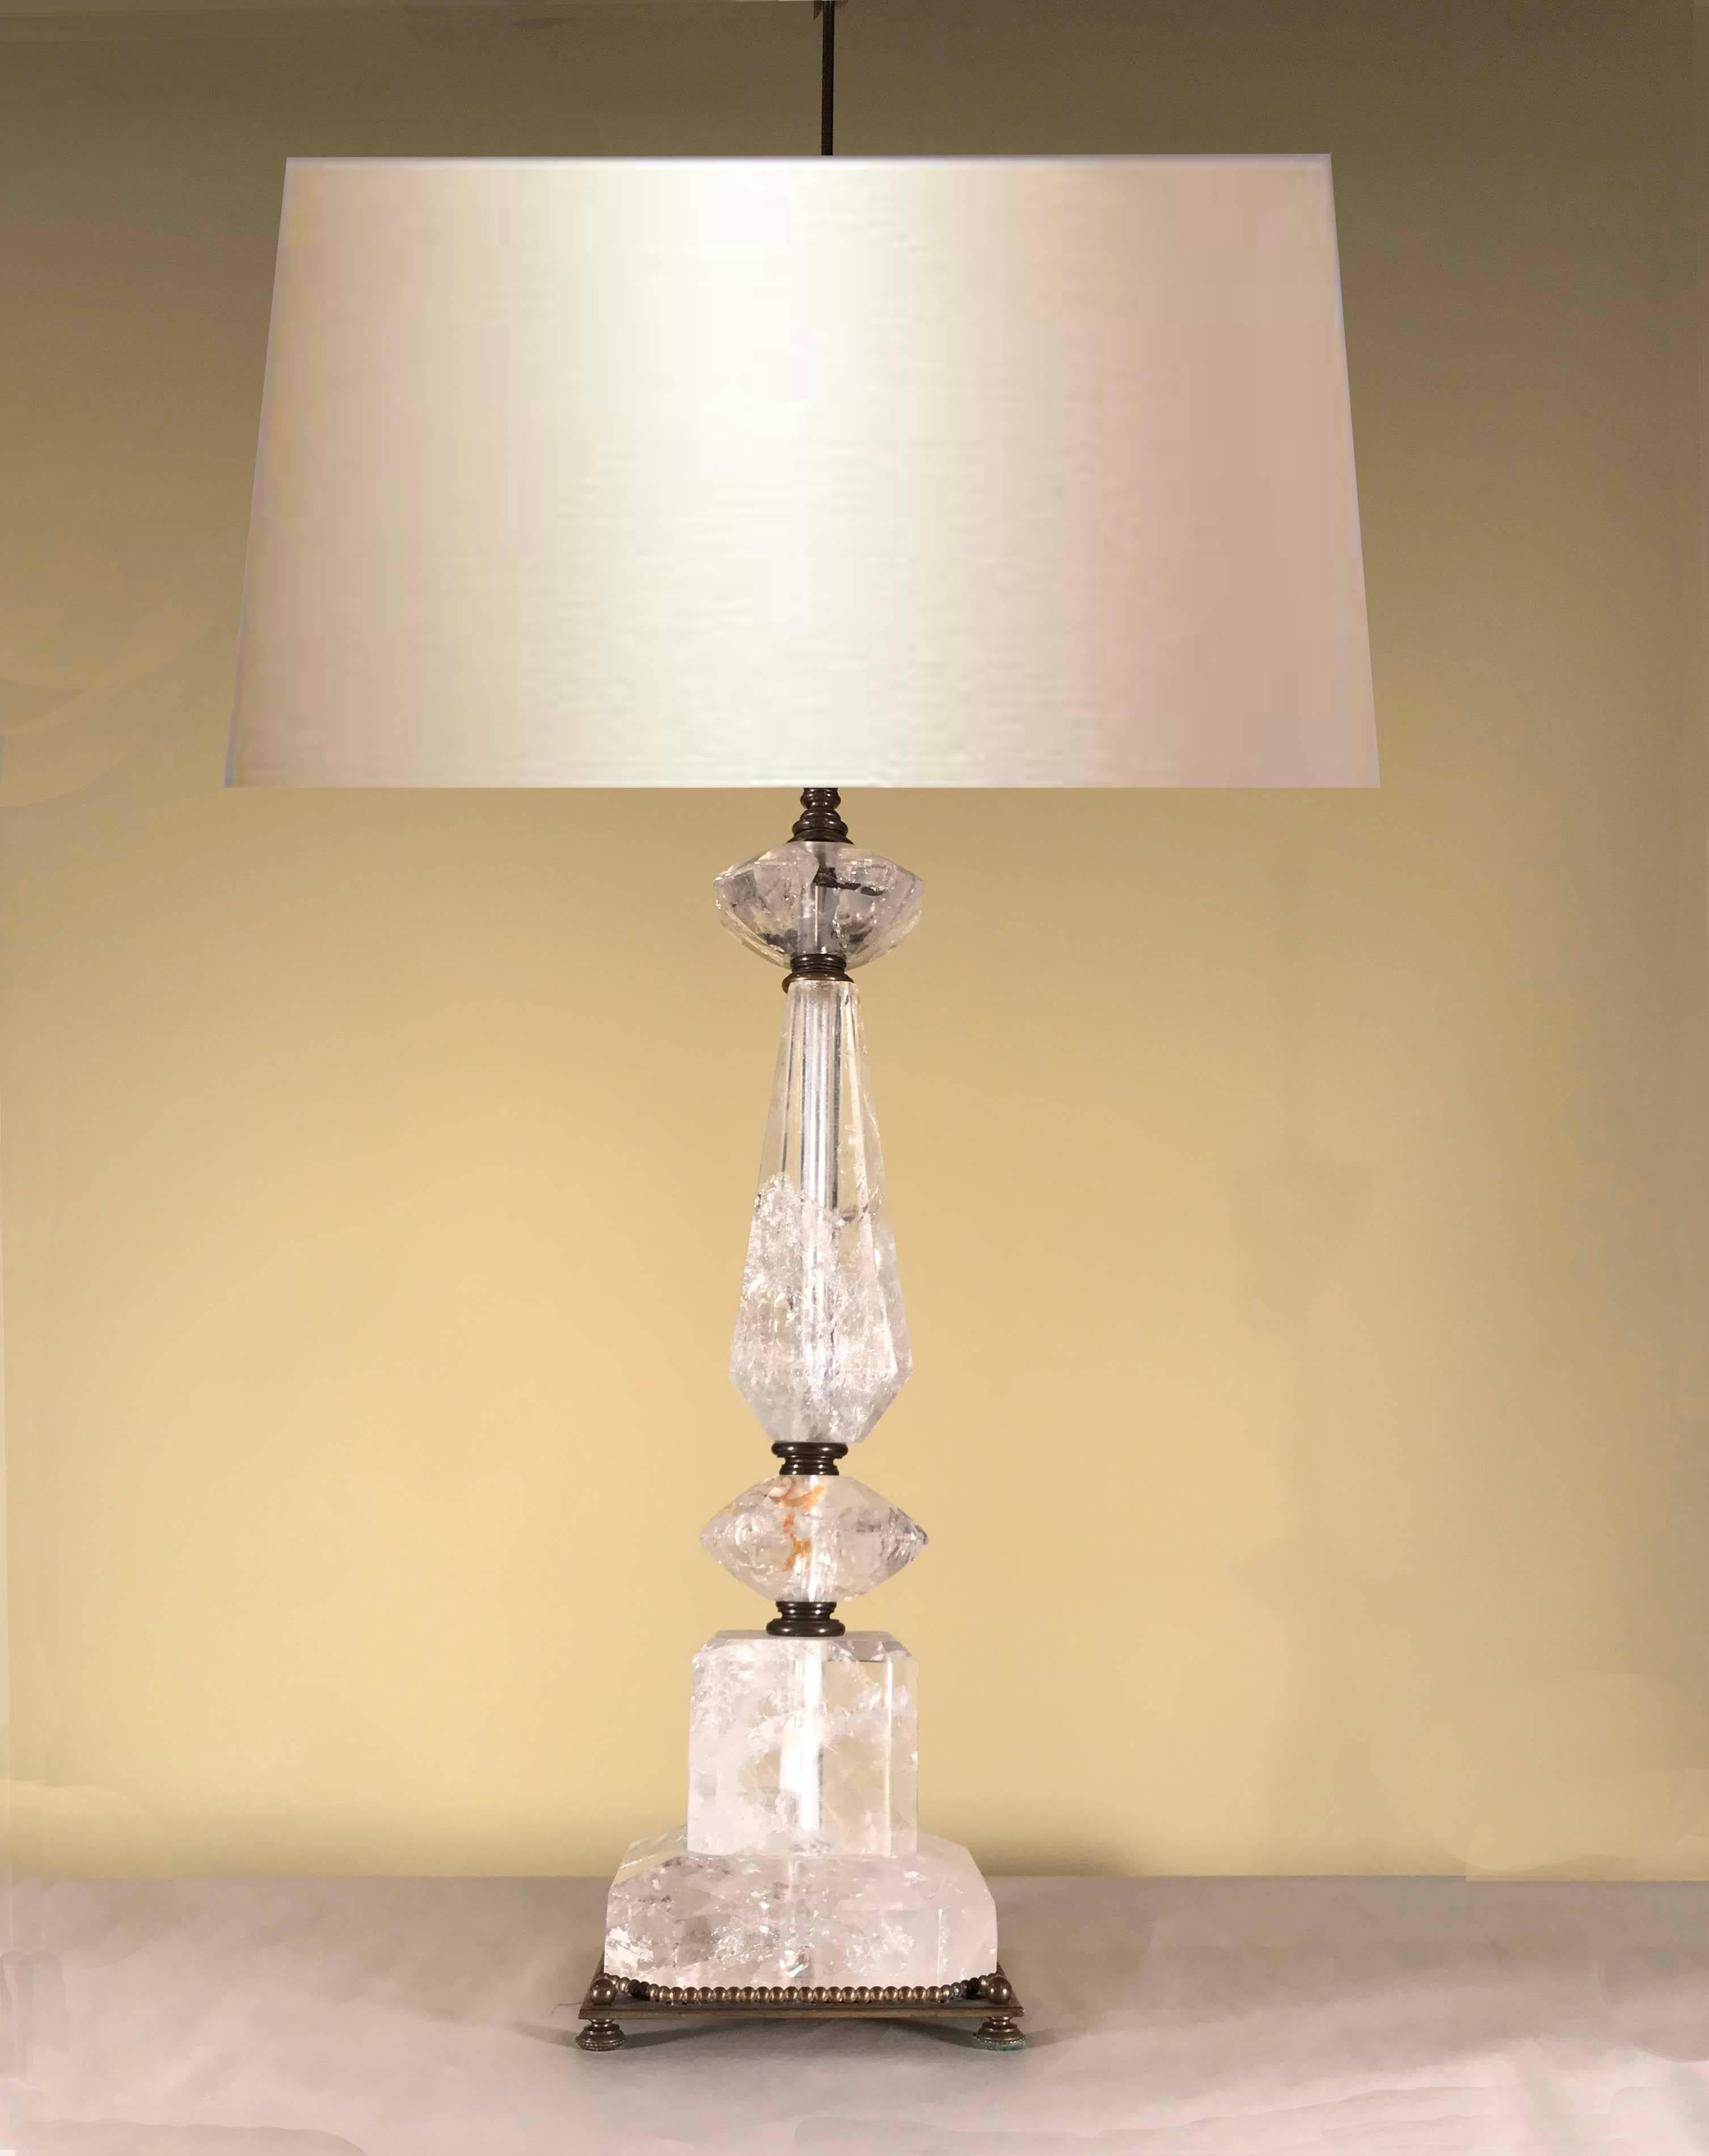 These lamps are modeled with polished shaped geometric rock crystal forms connected by a central rod. The square base is surmounted by a cube surmounted by a tapering faceted stem,  flanked top and bottom by a shaped cut solid trapezoid. The canted